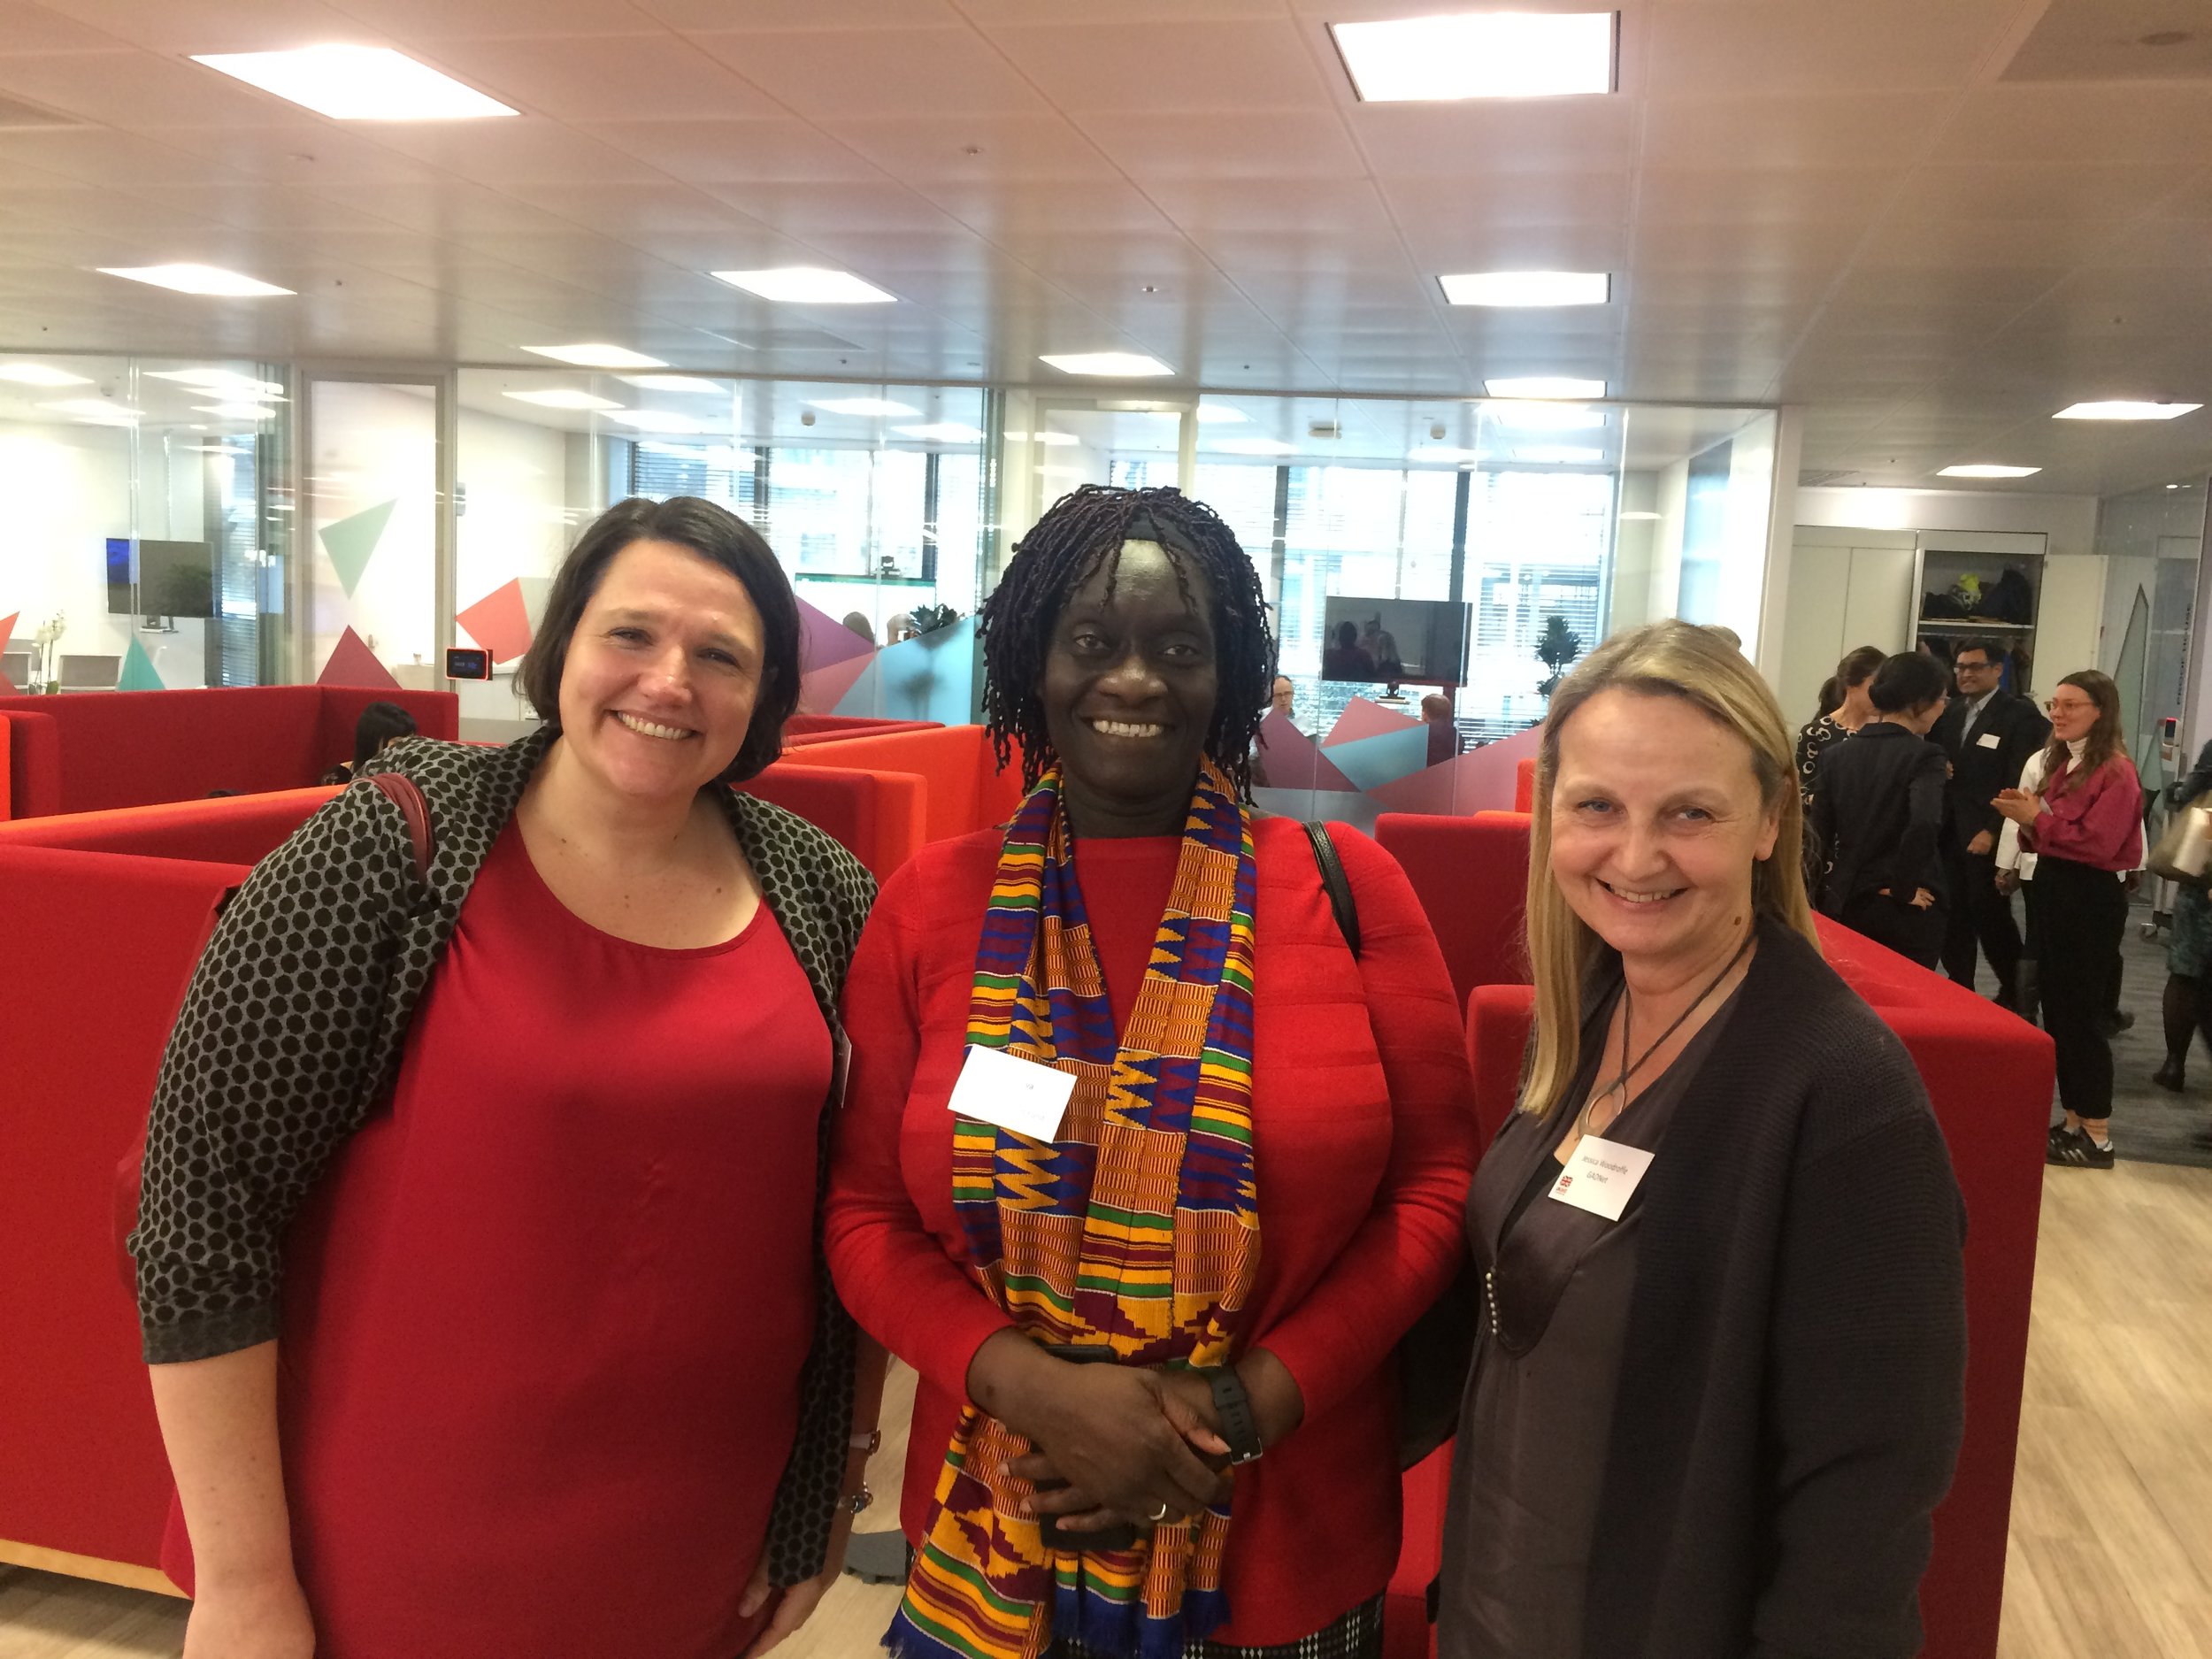  Lee Webster, GADN Chair, Theo Sowa, CEO, African Women’s Development Fund, Jessica Woodroffe, GADN Director, at the launch of DFID’s Strategic Vision for Gender Equality, March 2018 